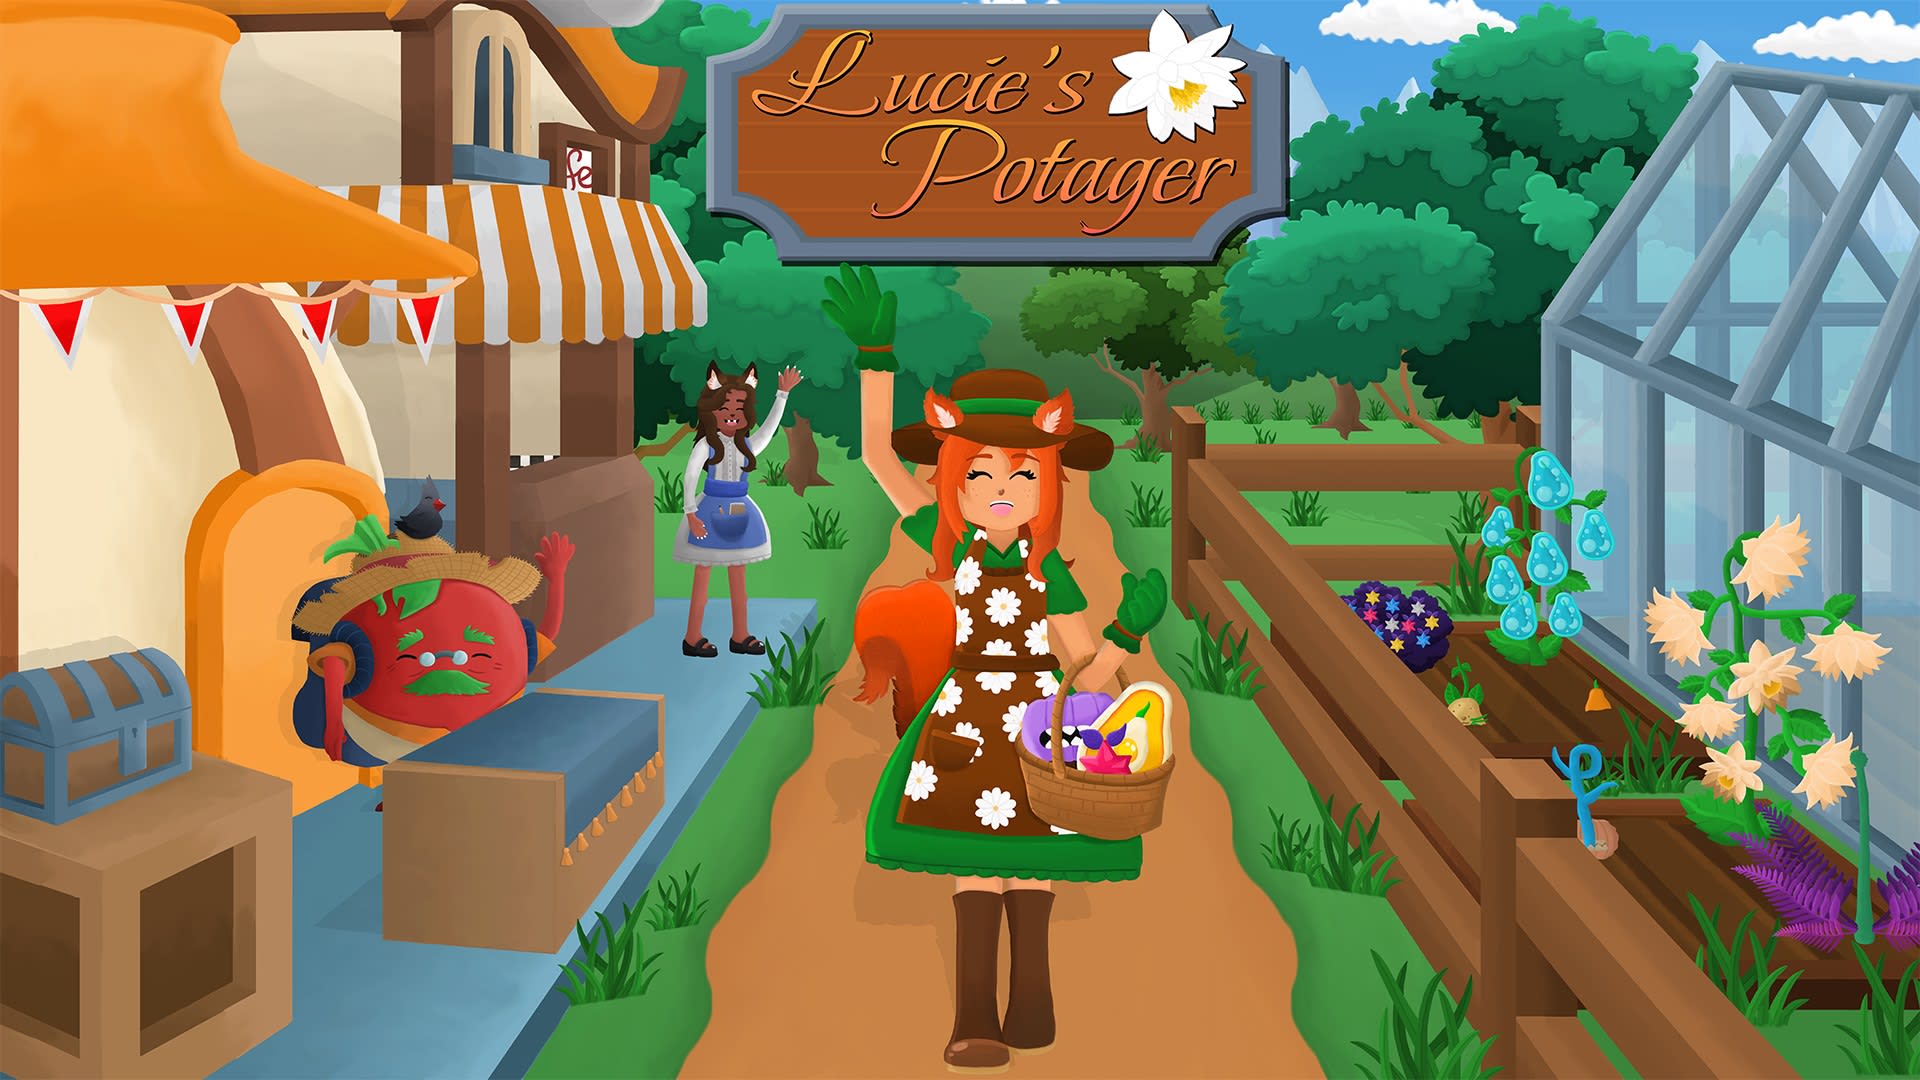 Lucie's Potager